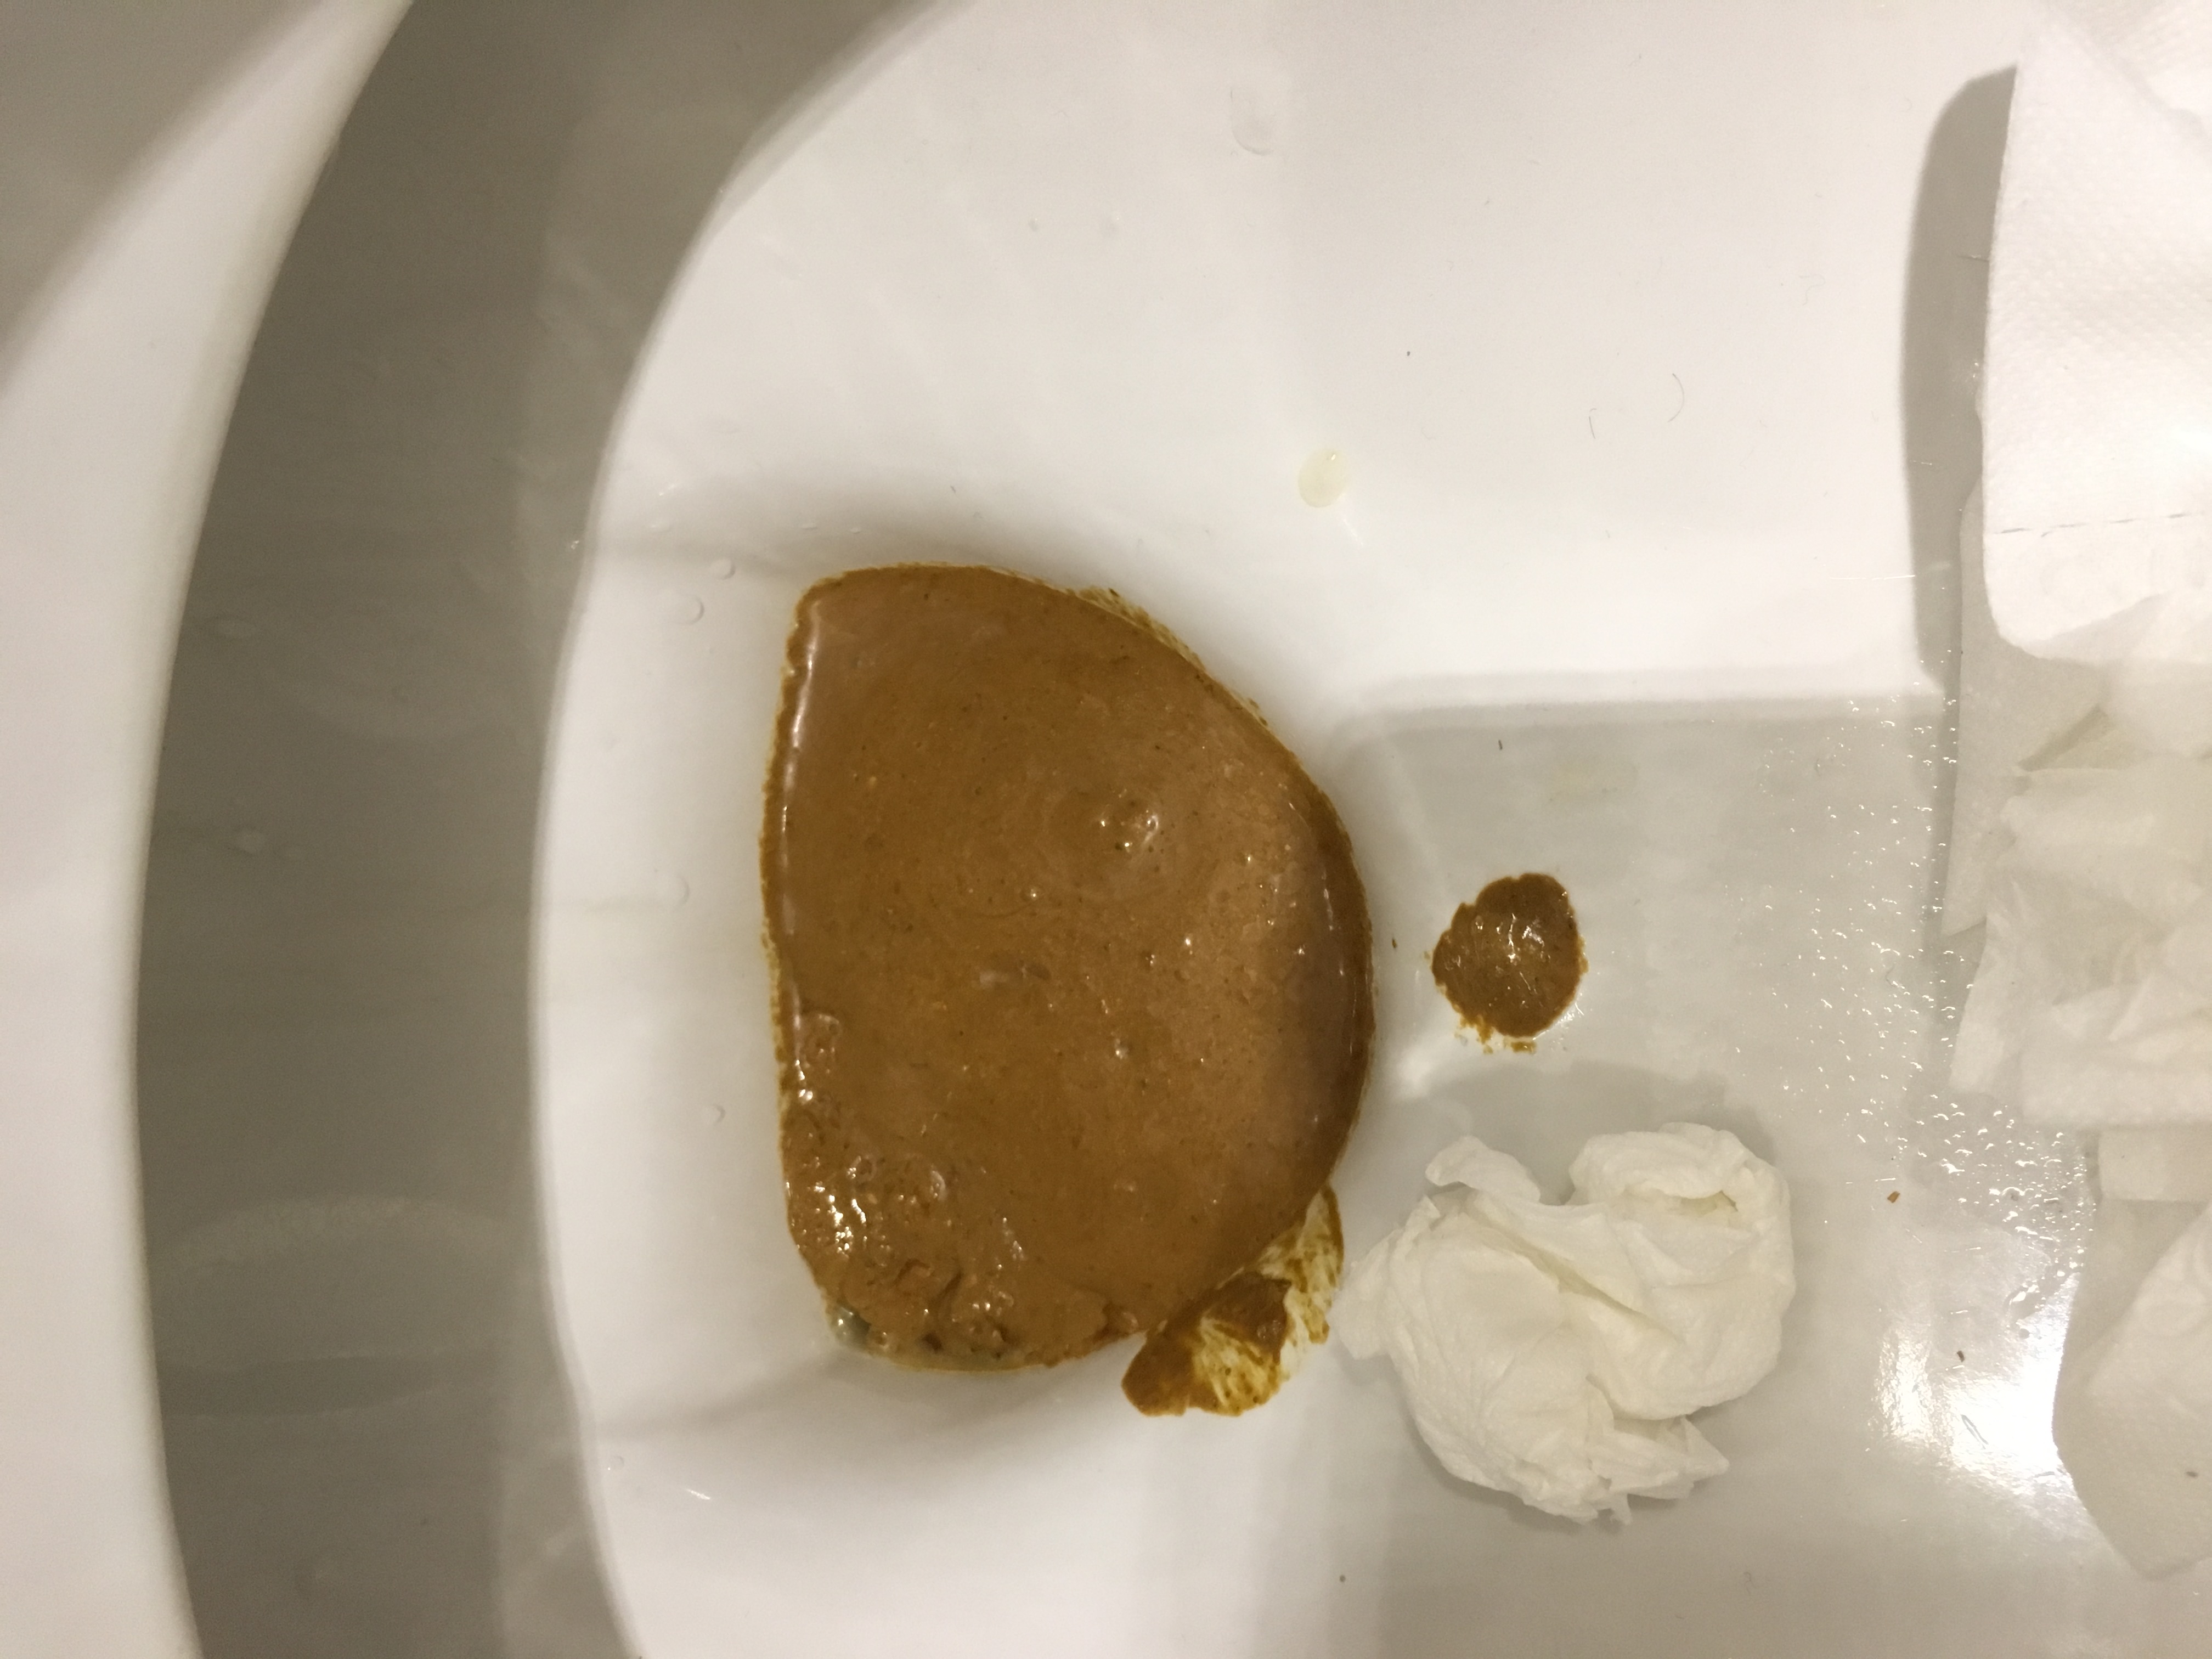 runny and noisy shit at work 11/21/2017